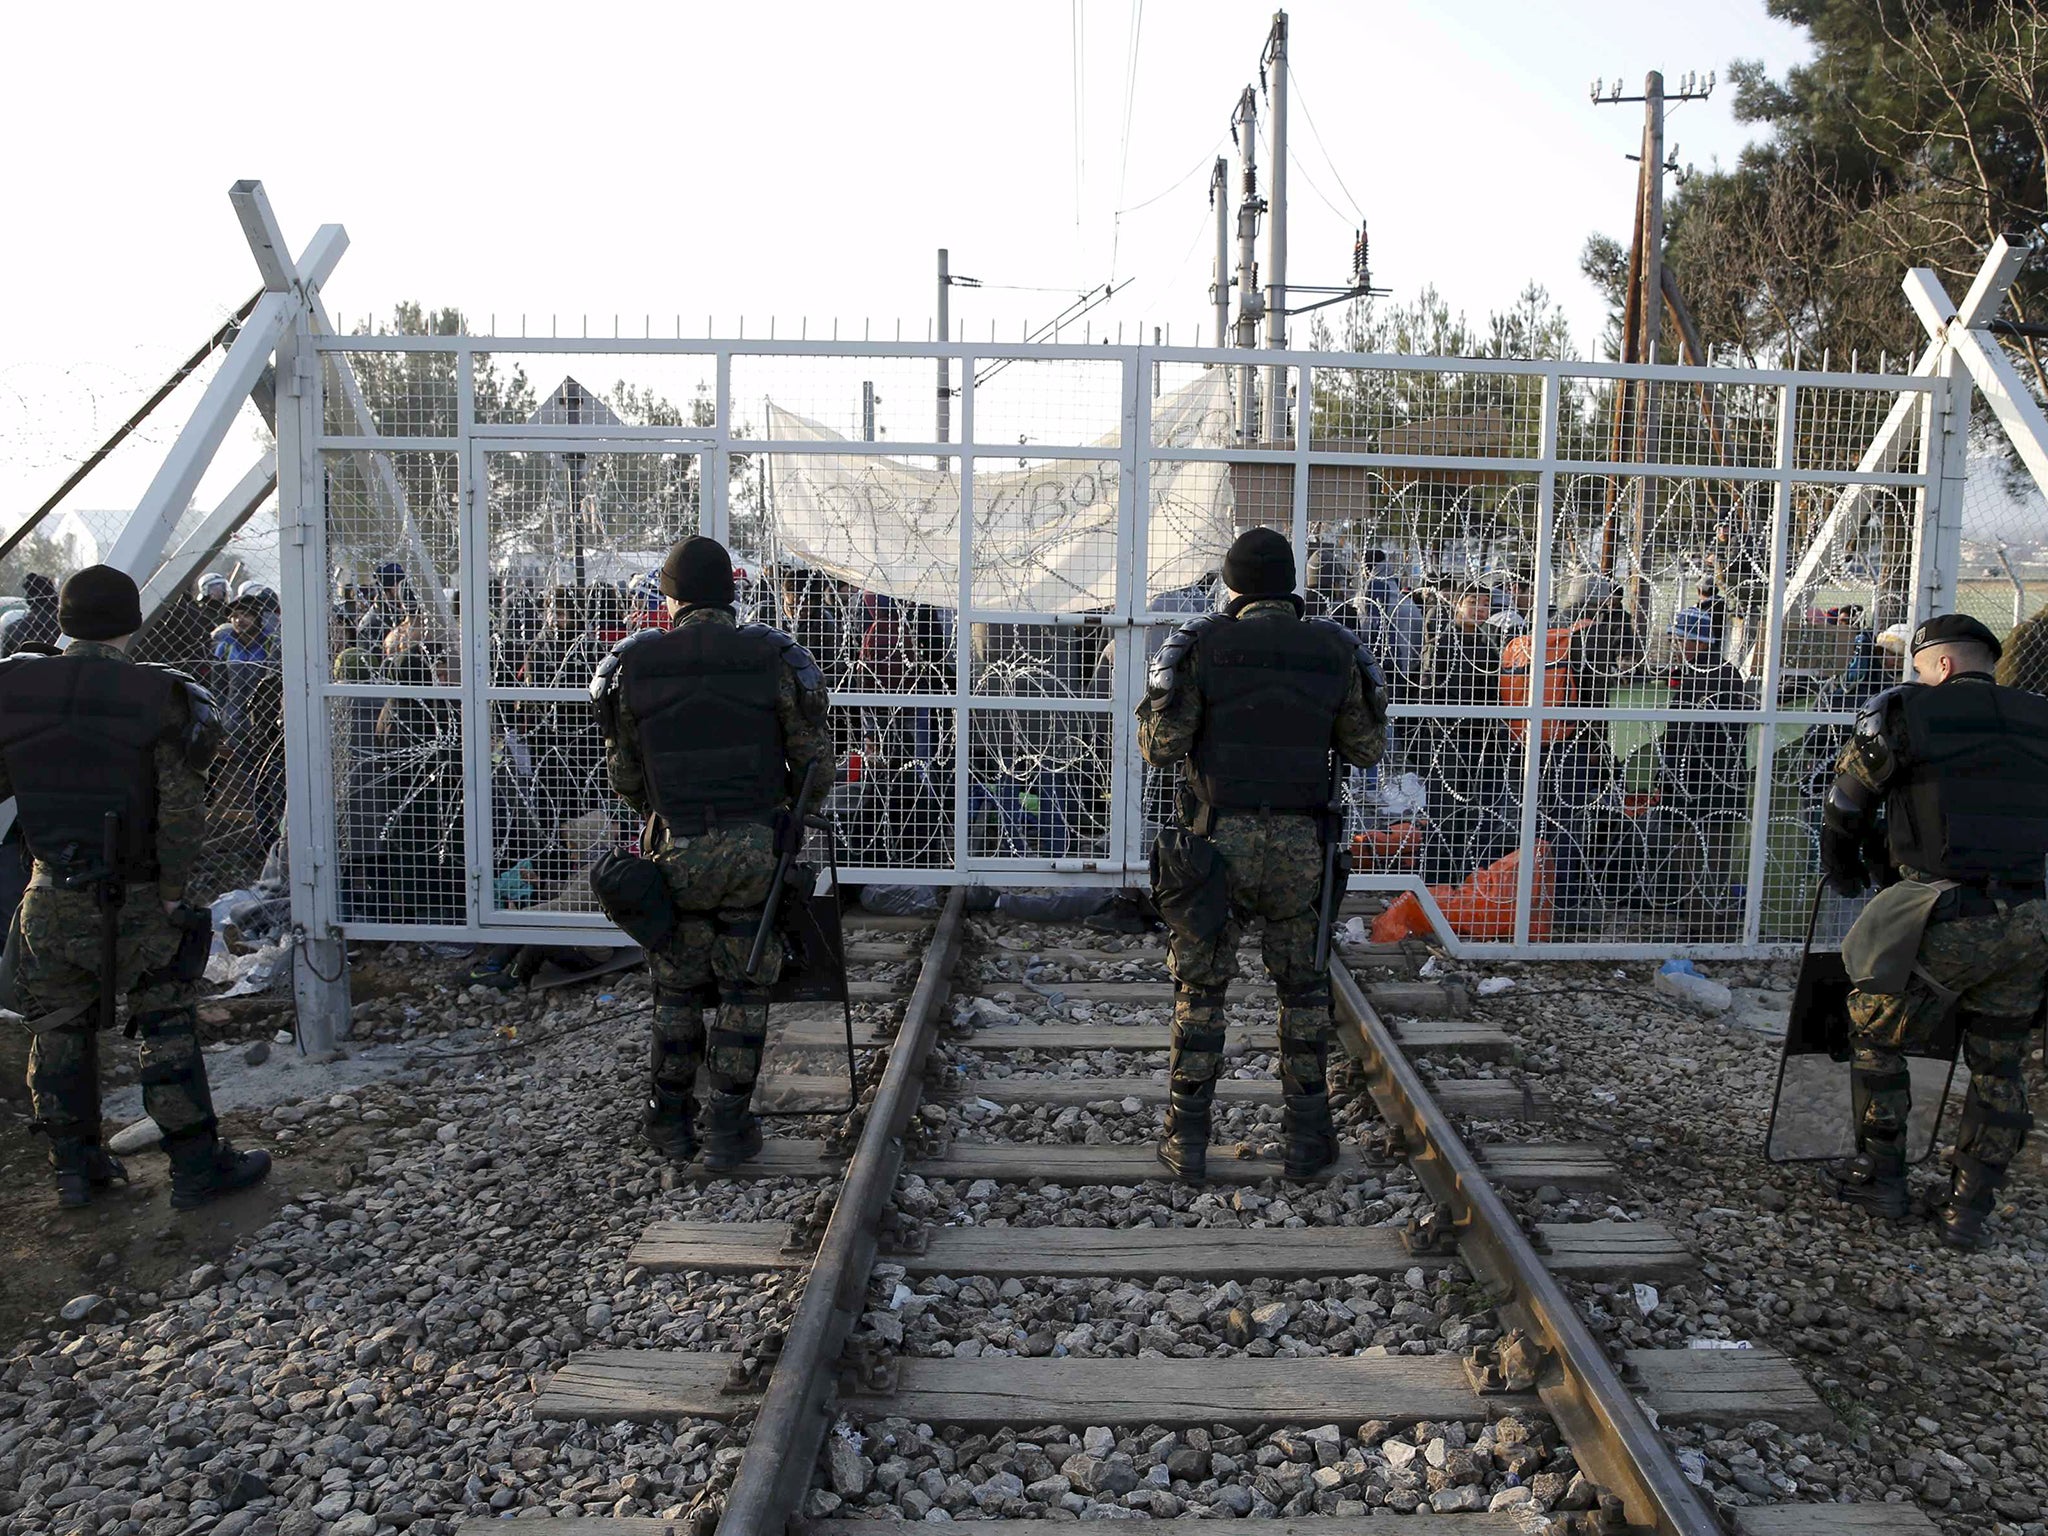 Macedonian policemen stand in front of a gate over rail tracks as migrants wait behind at the Greek-Macedonian border, after additional passage restrictions imposed by Macedonian authorities left hundreds of them stranded near the village of Idomeni, Greece.